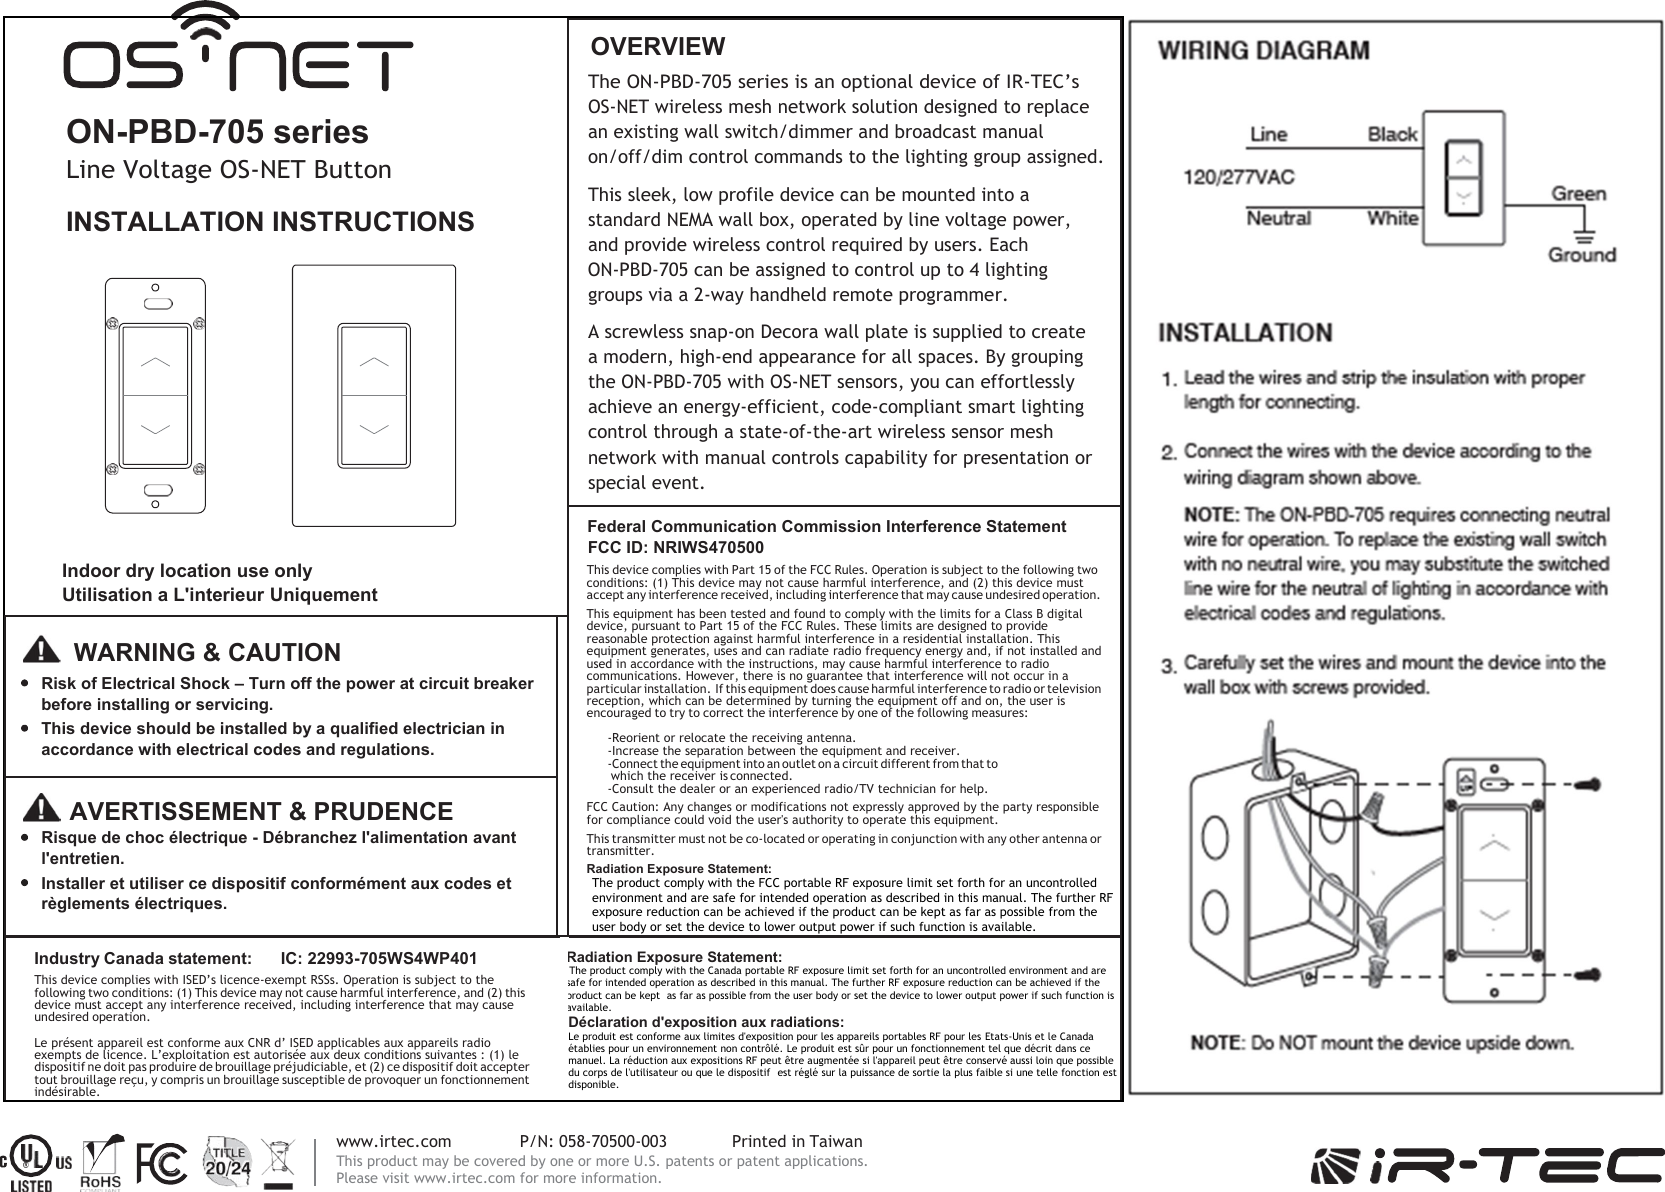     www.irtec.com  P/N: 058-70500-003  Printed in Taiwan This product may be covered by one or more U.S. patents or patent applications. Please visit www.irtec.com for more information.   ON-PBD-705 series Line Voltage OS-NET Button INSTALLATION INSTRUCTIONS               Indoor dry location use only Utilisation a L&apos;interieur Uniquement OVERVIEW The ON-PBD-705 series is an optional device of IR-TEC’s OS-NET wireless mesh network solution designed to replace an existing wall switch/dimmer and broadcast manual on/off/dim control commands to the lighting group assigned. This sleek, low profile device can be mounted into a standard NEMA wall box, operated by line voltage power, and provide wireless control required by users. Each ON-PBD-705 can be assigned to control up to 4 lighting groups via a 2-way handheld remote programmer. A screwless snap-on Decora wall plate is supplied to create a modern, high-end appearance for all spaces. By grouping the ON-PBD-705 with OS-NET sensors, you can effortlessly achieve an energy-efficient, code-compliant smart lighting control through a state-of-the-art wireless sensor mesh network with manual controls capability for presentation or special event. Federal Communication Commission Interference Statement FCC ID: NRIWS470500 This device complies with Part 15 of the FCC Rules. Operation is subject to the following two conditions: (1) This device may not cause harmful interference, and (2) this device must accept any interference received, including interference that may cause undesired operation. This equipment has been tested and found to comply with the limits for a Class B digital device, pursuant to Part 15 of the FCC Rules. These limits are designed to provide reasonable protection against harmful interference in a residential installation. This equipment generates, uses and can radiate radio frequency energy and, if not installed and used in accordance with the instructions, may cause harmful interference to radio communications. However, there is no guarantee that interference will not occur in a particular installation. If this equipment does cause harmful interference to radio or television reception, which can be determined by turning the equipment off and on, the user is encouraged to try to correct the interference by one of the following measures: -Reorient or relocate the receiving antenna. -Increase the separation between the equipment and receiver. -Connect the equipment into an outlet on a circuit different from that to which the receiver is connected. -Consult the dealer or an experienced radio/TV technician for help. FCC Caution: Any changes or modifications not expressly approved by the party responsible for compliance could void the user&apos;s authority to operate this equipment. This transmitter must not be co-located or operating in conjunction with any other antenna or transmitter. Radiation Exposure Statement: The product comply with the FCC portable RF exposure limit set forth for an uncontrolled environment and are safe for intended operation as described in this manual. The further RF exposure reduction can be achieved if the product can be kept as far as possible from the user body or set the device to lower output power if such function is available.    WARNING &amp; CAUTION Risk of Electrical Shock – Turn off the power at circuit breaker before installing or servicing. This device should be installed by a qualified electrician in accordance with electrical codes and regulations.    AVERTISSEMENT &amp; PRUDENCE Risque de choc électrique - Débranchez l&apos;alimentation avant l&apos;entretien. Installer et utiliser ce dispositif conformément aux codes et règlements électriques. Industry Canada statement:  IC: 22993-705WS4WP401 This device complies with ISED’s licence-exempt RSSs. Operation is subject to the following two conditions: (1) This device may not cause harmful interference, and (2) this device must accept any interference received, including interference that may cause undesired operation. Le présent appareil est conforme aux CNR d’ ISED applicables aux appareils radio exempts de licence. L’exploitation est autorisée aux deux conditions suivantes : (1) le dispositif ne doit pas produire de brouillage préjudiciable, et (2) ce dispositif doit accepter tout brouillage reçu, y compris un brouillage susceptible de provoquer un fonctionnement indésirable.  Radiation Exposure Statement:  The product comply with the Canada portable RF exposure limit set forth for an uncontrolled environment and are safe for intended operation as described in this manual. The further RF exposure reduction can be achieved if the product can be kept as far as possible from the user body or set the device to lower output power if such function is available. Déclaration d&apos;exposition aux radiations: Le produit est conforme aux limites d&apos;exposition pour les appareils portables RF pour les Etats-Unis et le Canada établies pour un environnement non contrôlé. Le produit est sûr pour un fonctionnement tel que décrit dans ce manuel. La réduction aux expositions RF peut être augmentée si l&apos;appareil peut être conservé aussi loin que possible du corps de l&apos;utilisateur ou que le dispositif est réglé sur la puissance de sortie la plus faible si une telle fonction est disponible.  